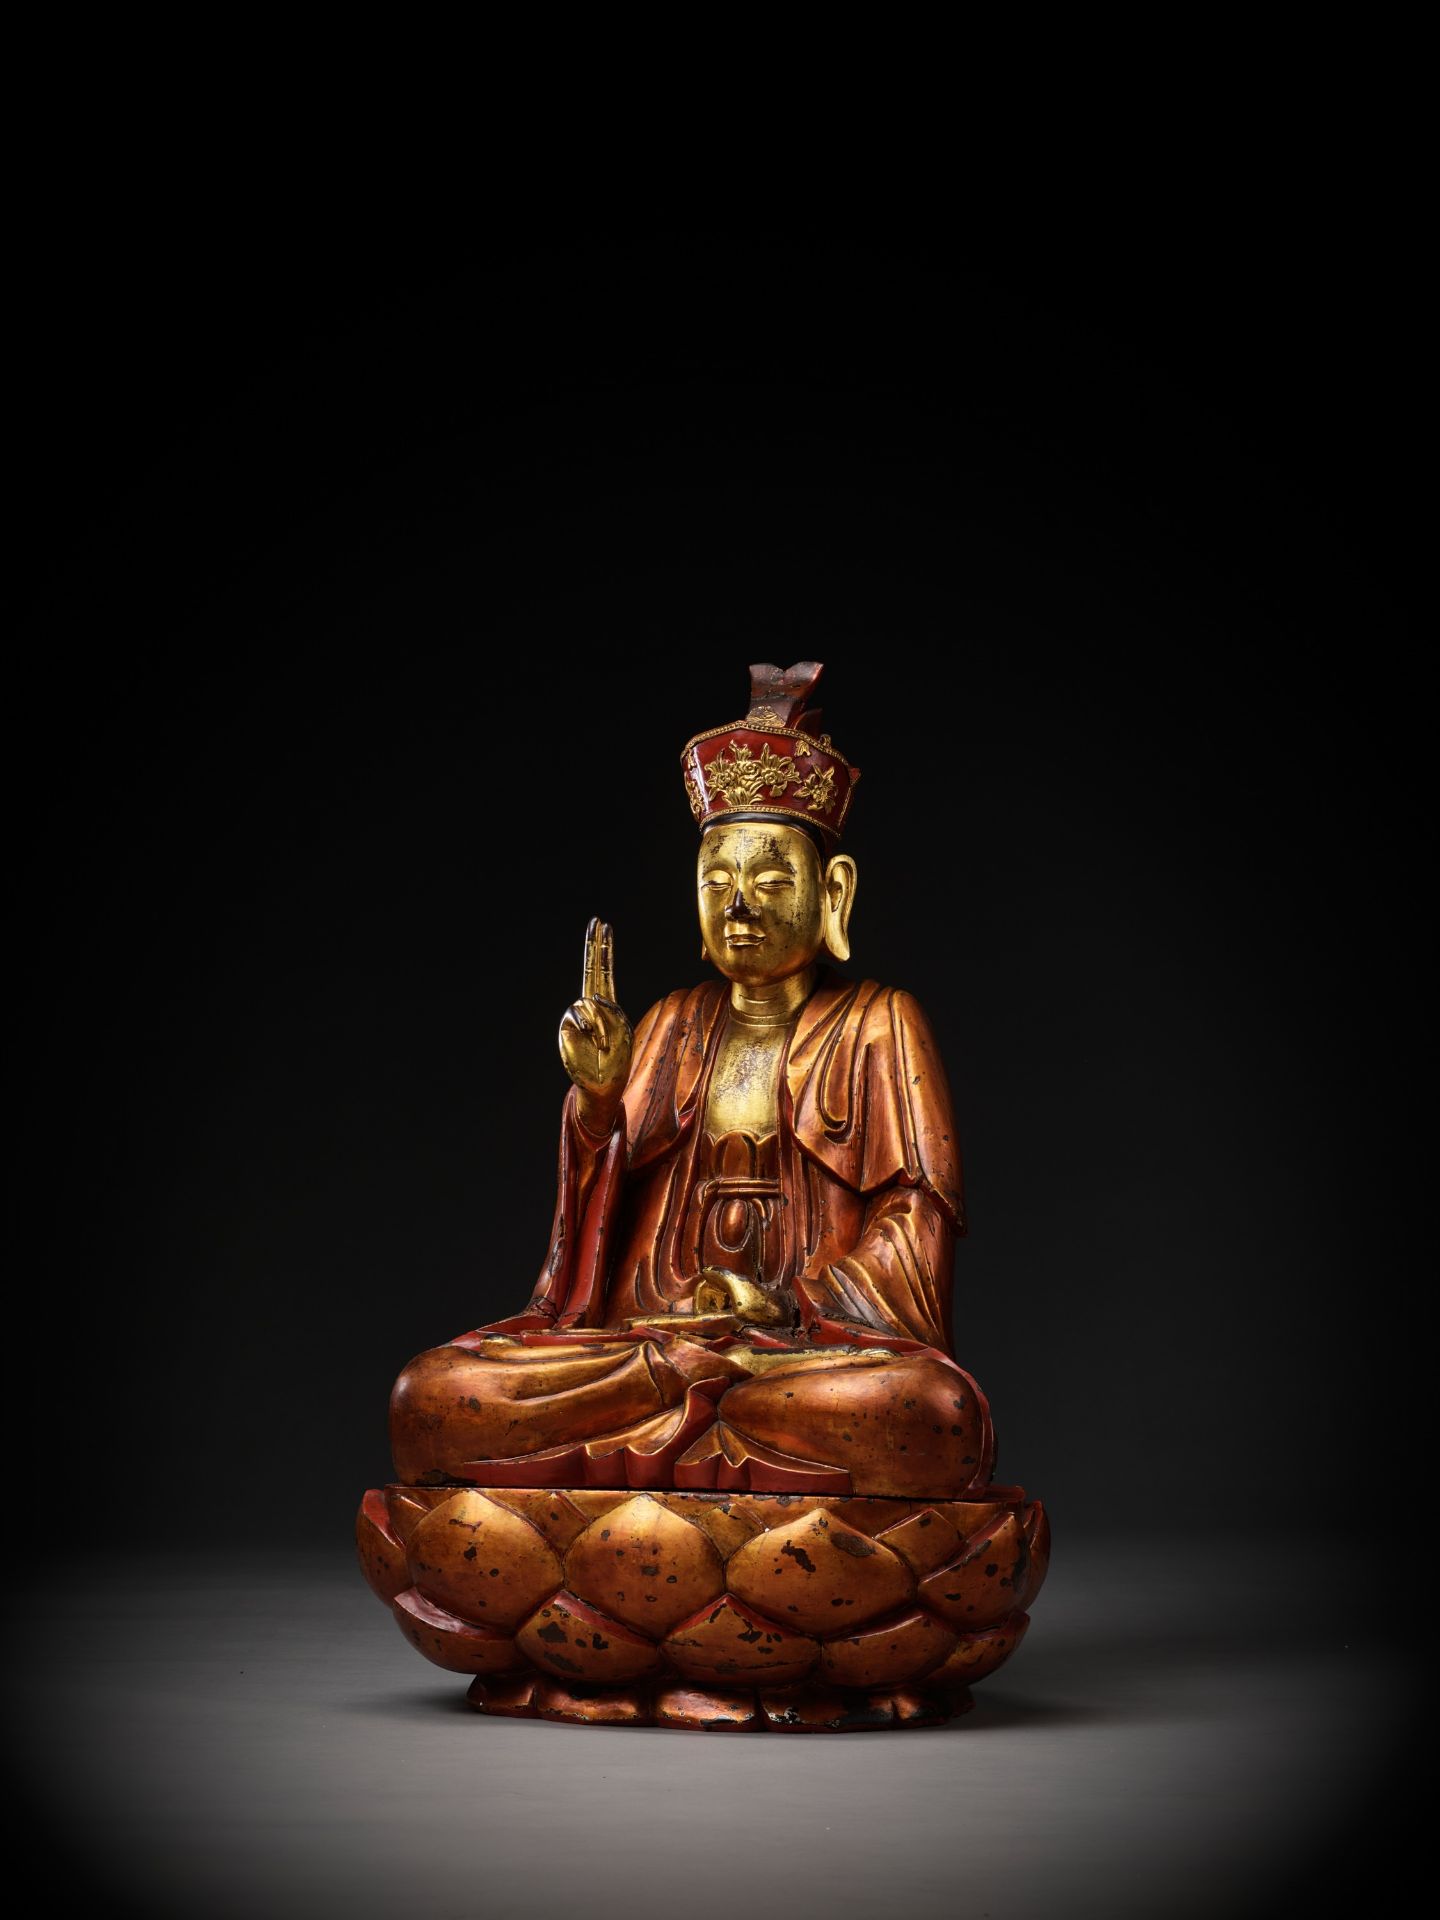 A LARGE GILT-LACQUERED WOOD FIGURE OF A BODHISATTVA, VIETNAM, 17TH-18TH CENTURY - Image 5 of 14